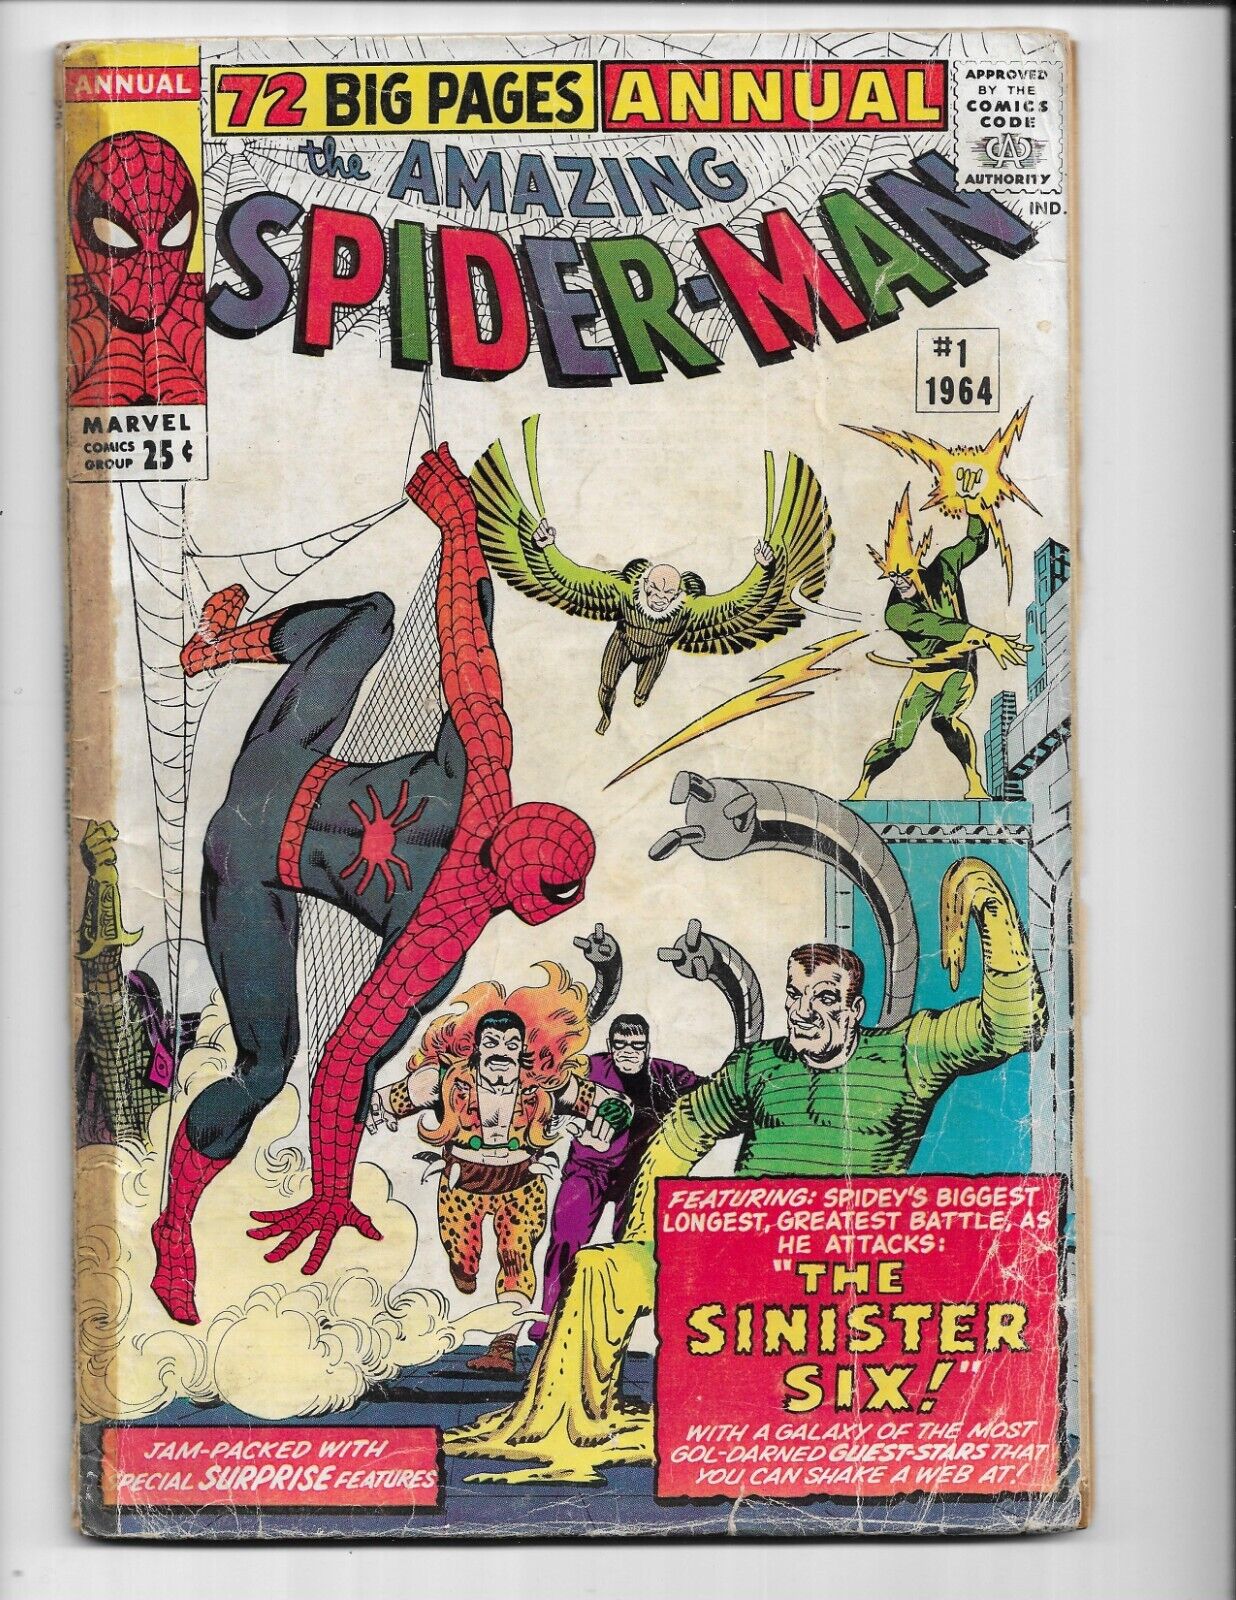 AMAZING SPIDER-MAN ANNUAL 1 - G 2.0 - 1ST APPEARANCE OF SINISTER SIX (1964)